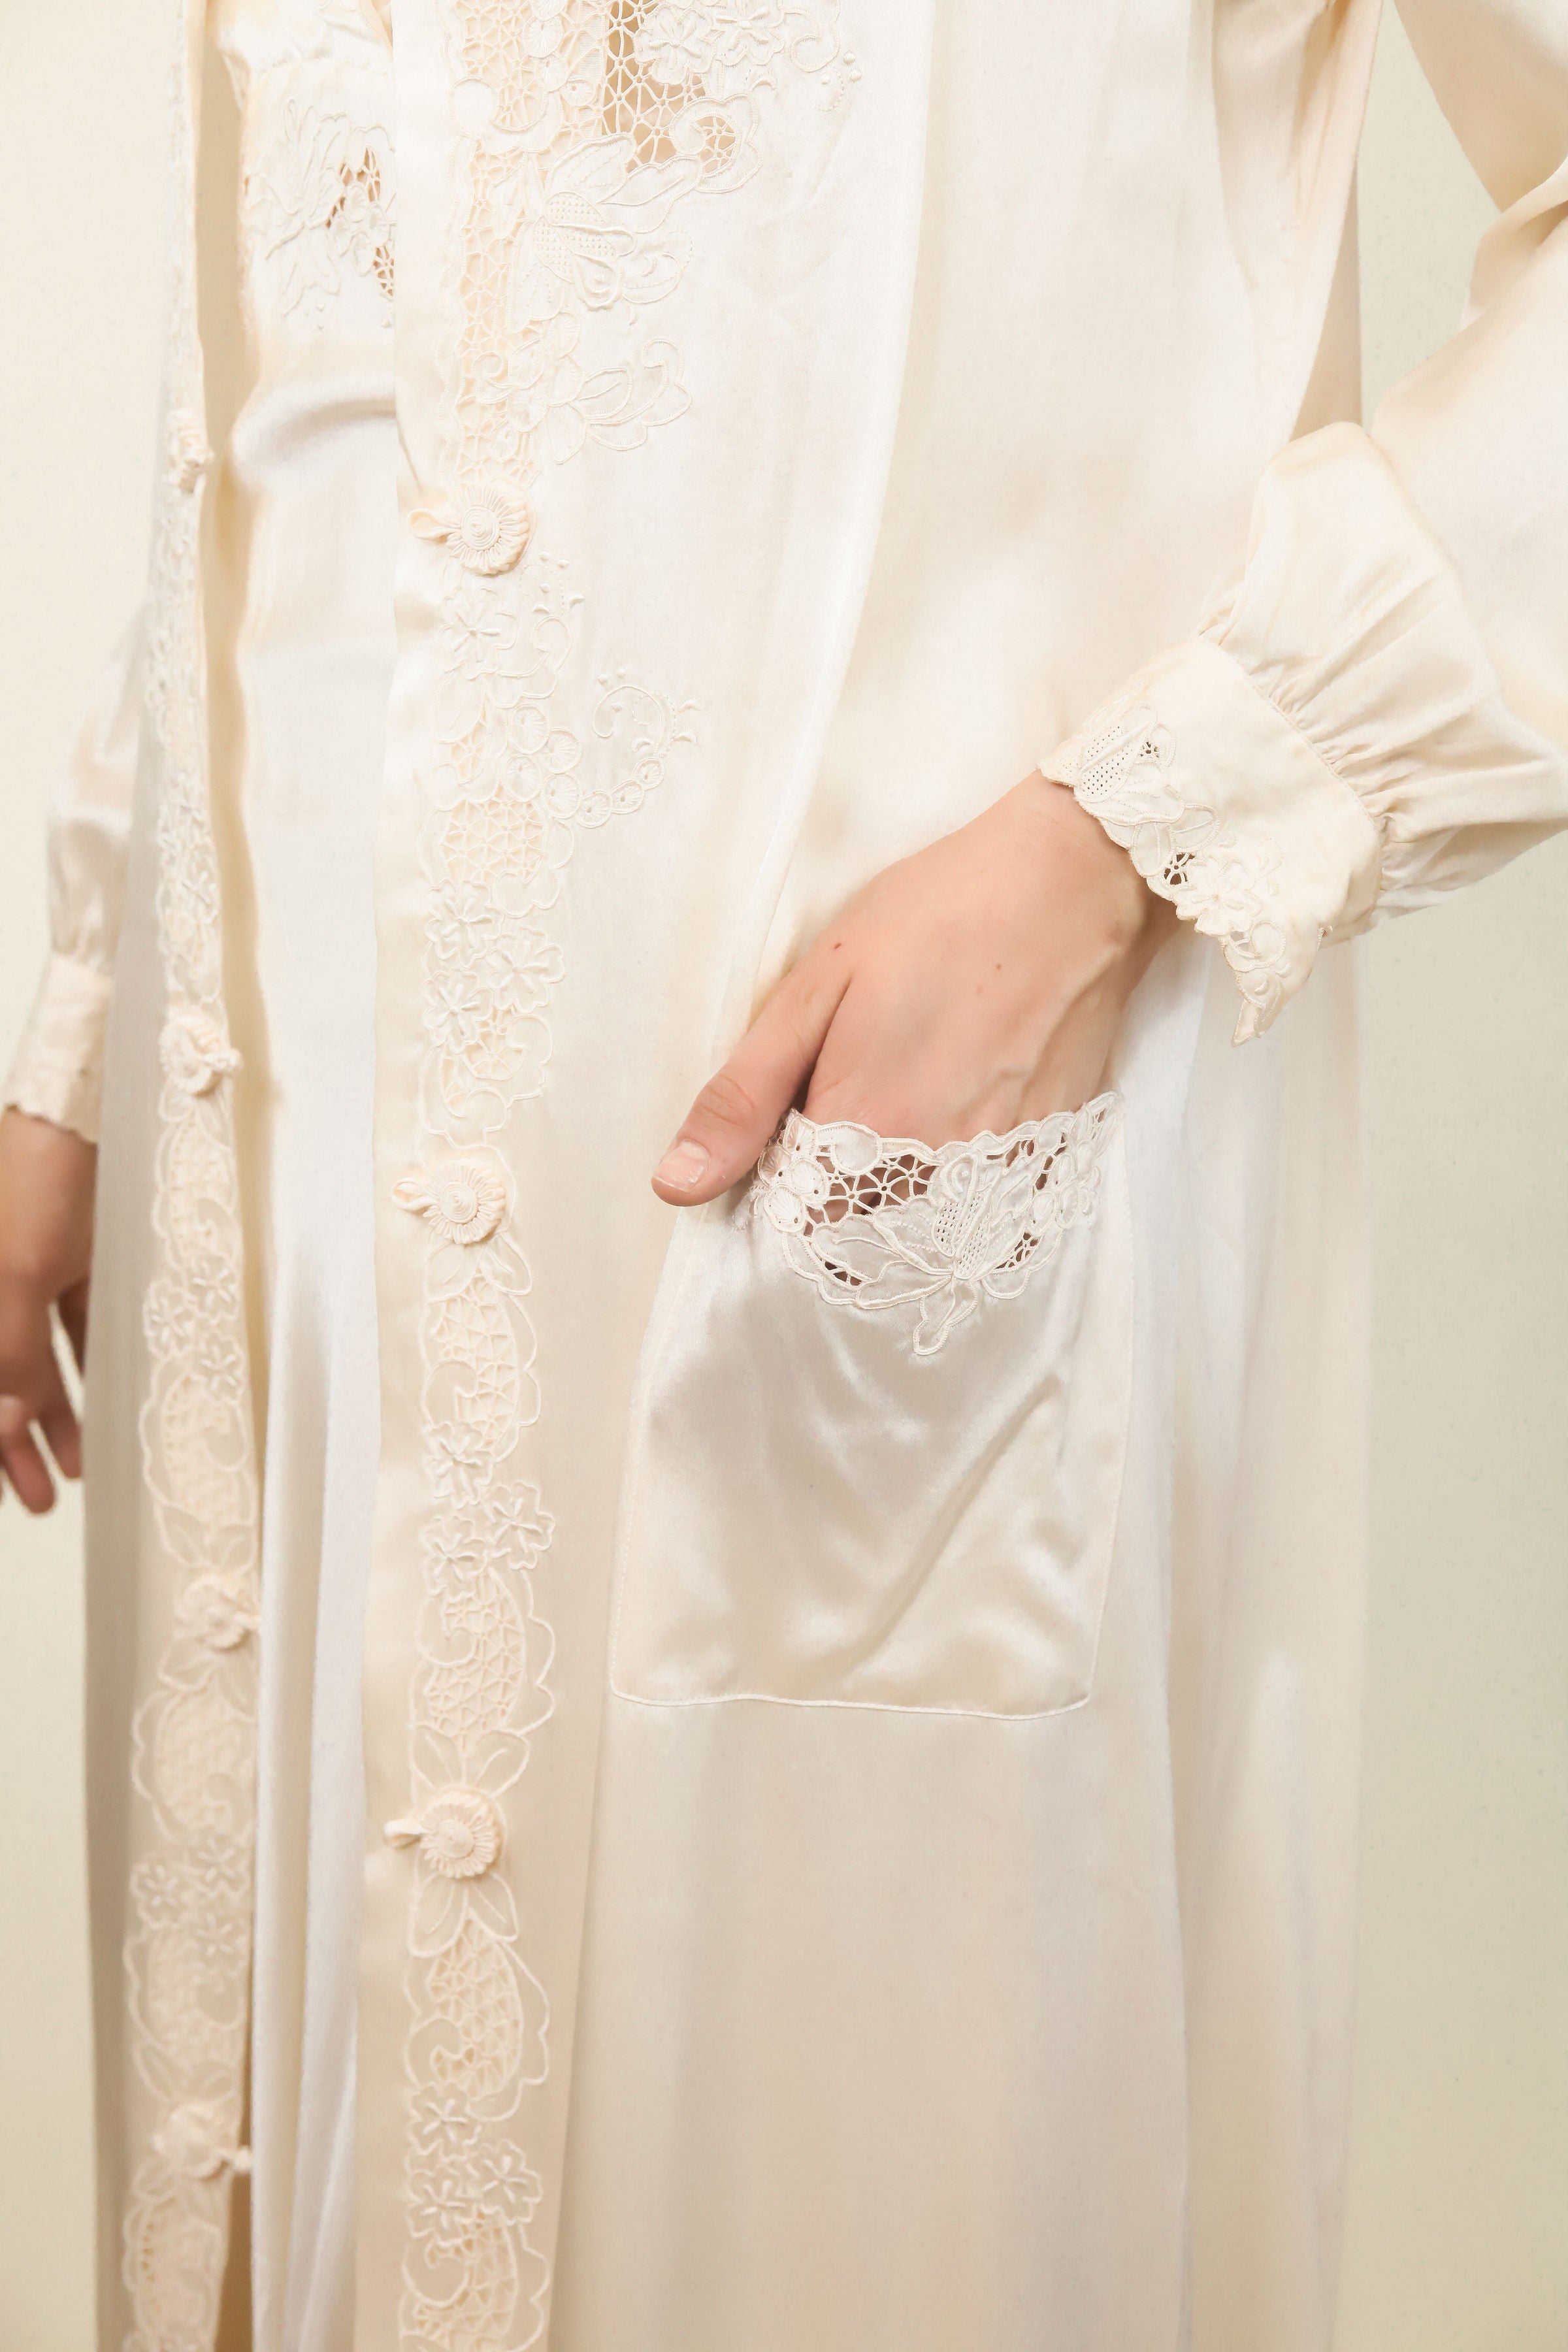 Ivory Silk and Lace Dress and Robe Set